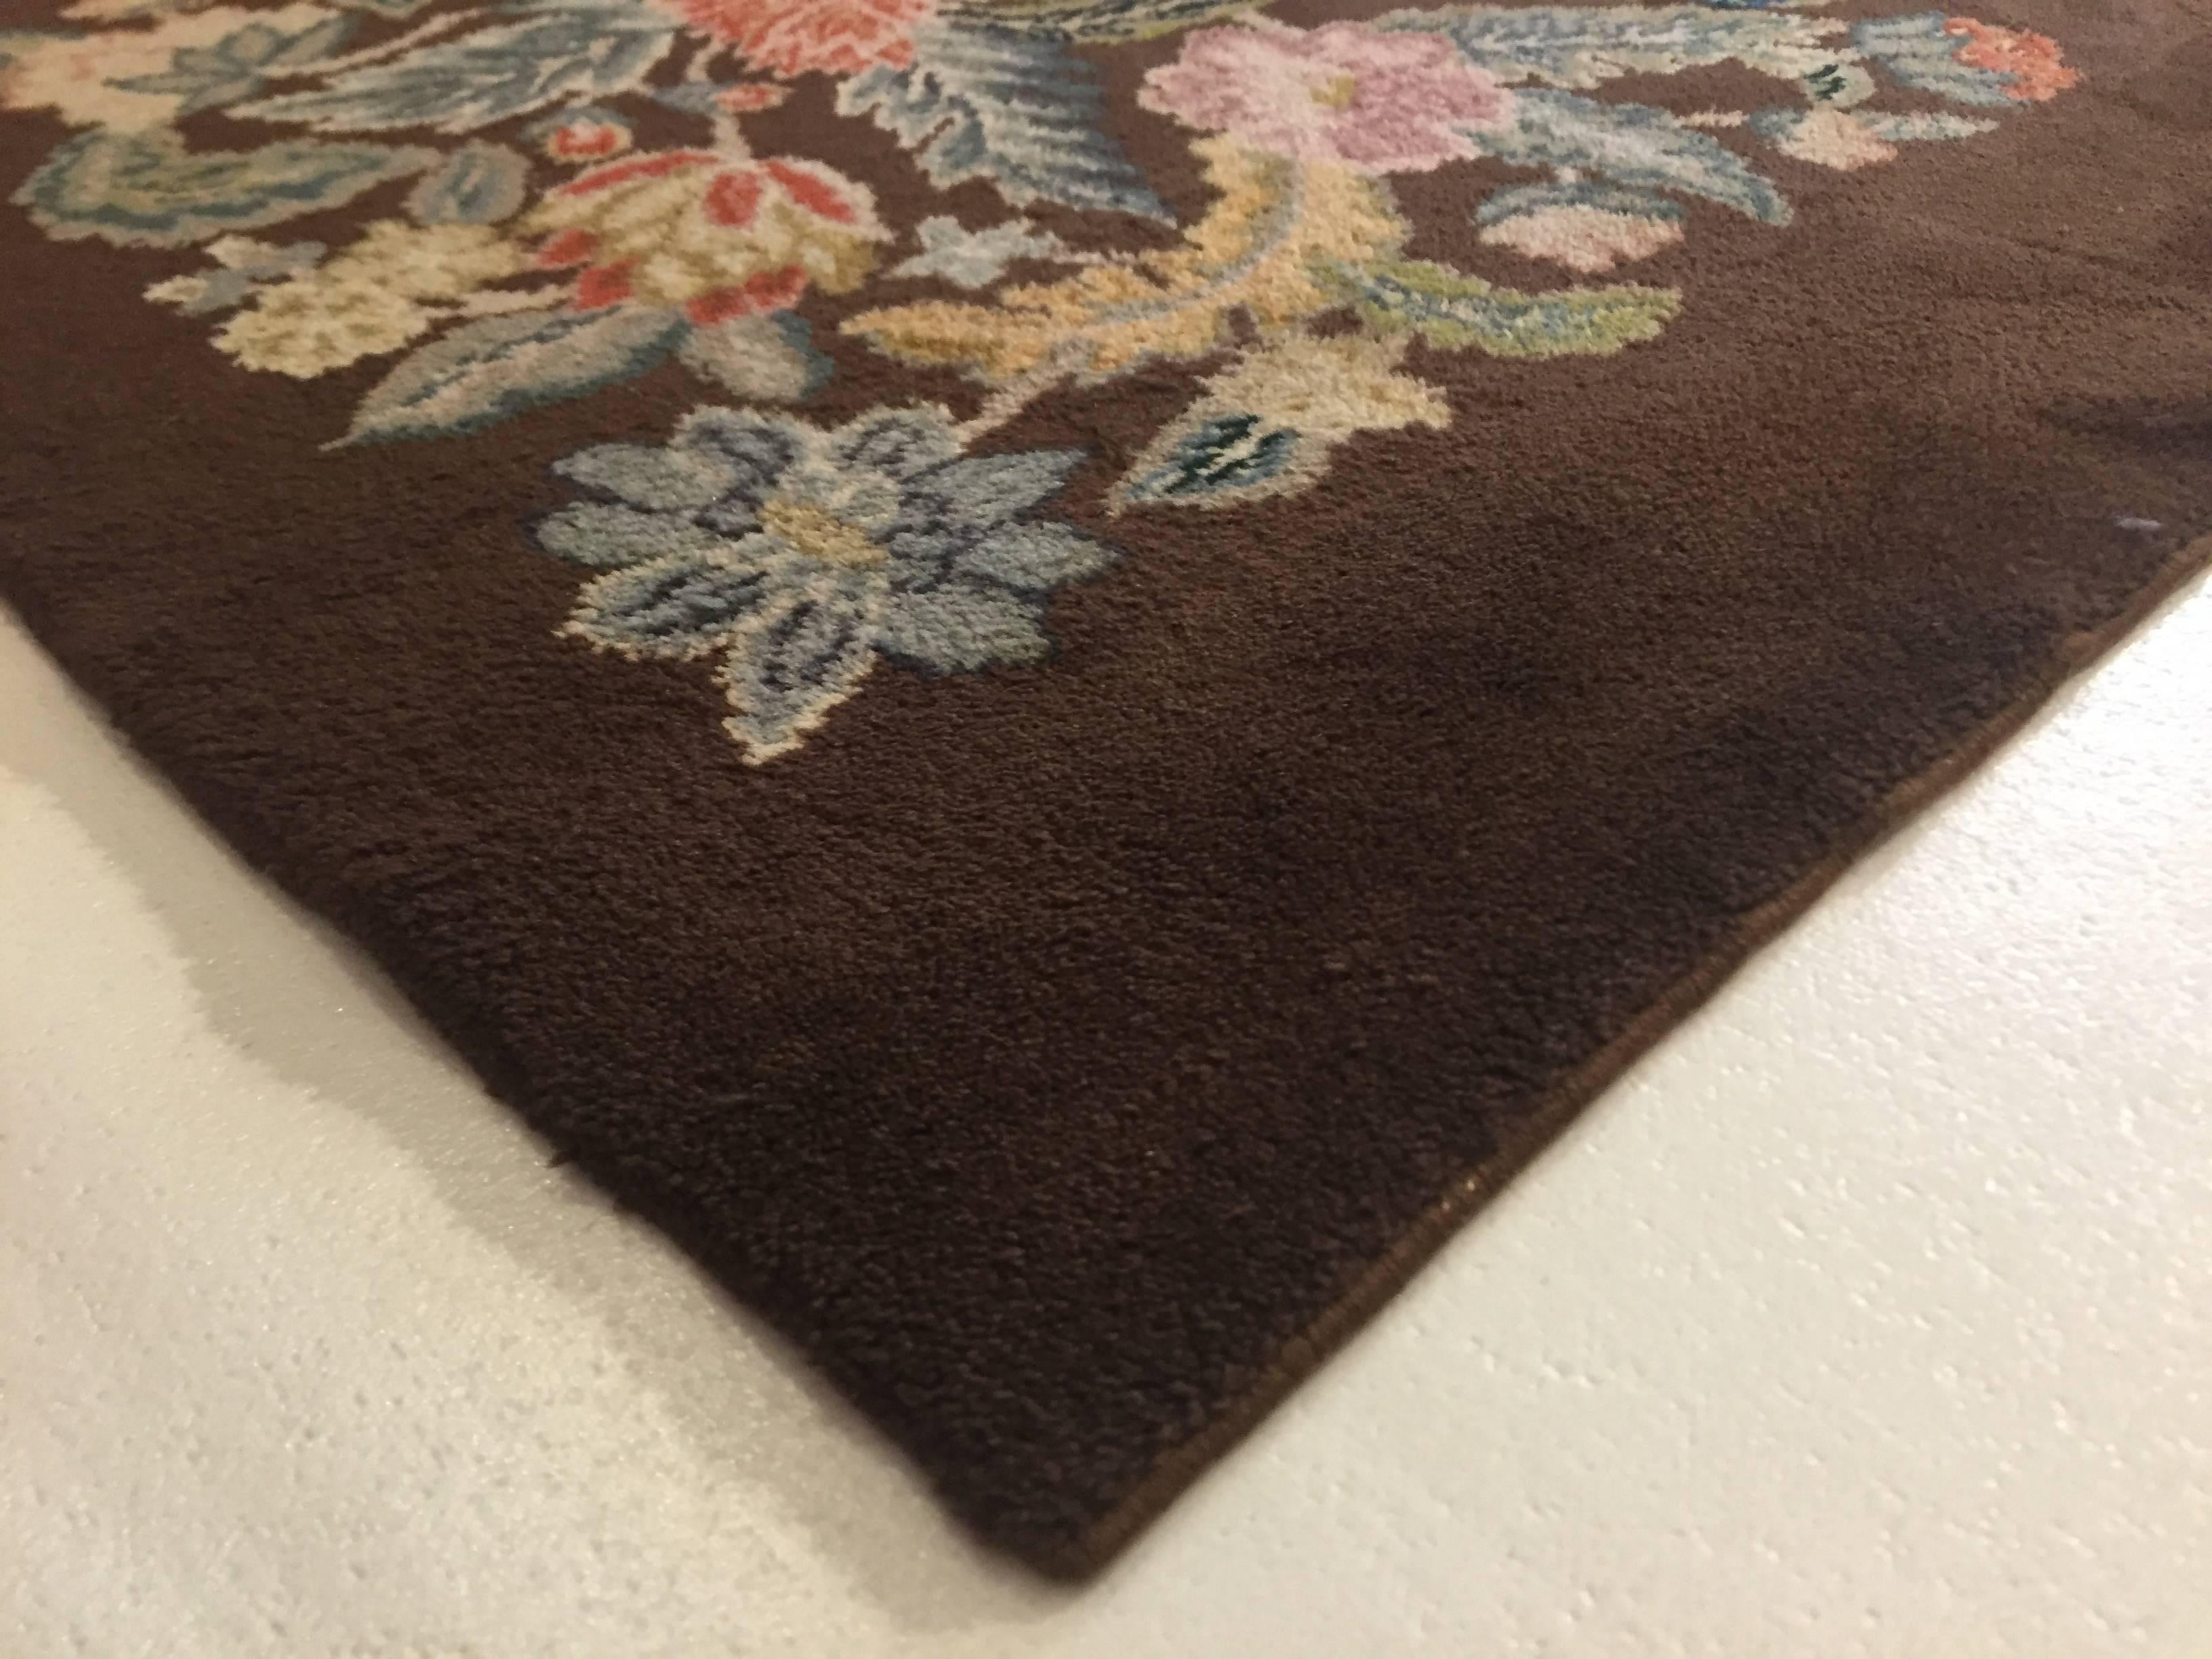 European 20th Century Art Deco Hand-Knotted Savonerie Square Rug Wool Brown Floral For Sale